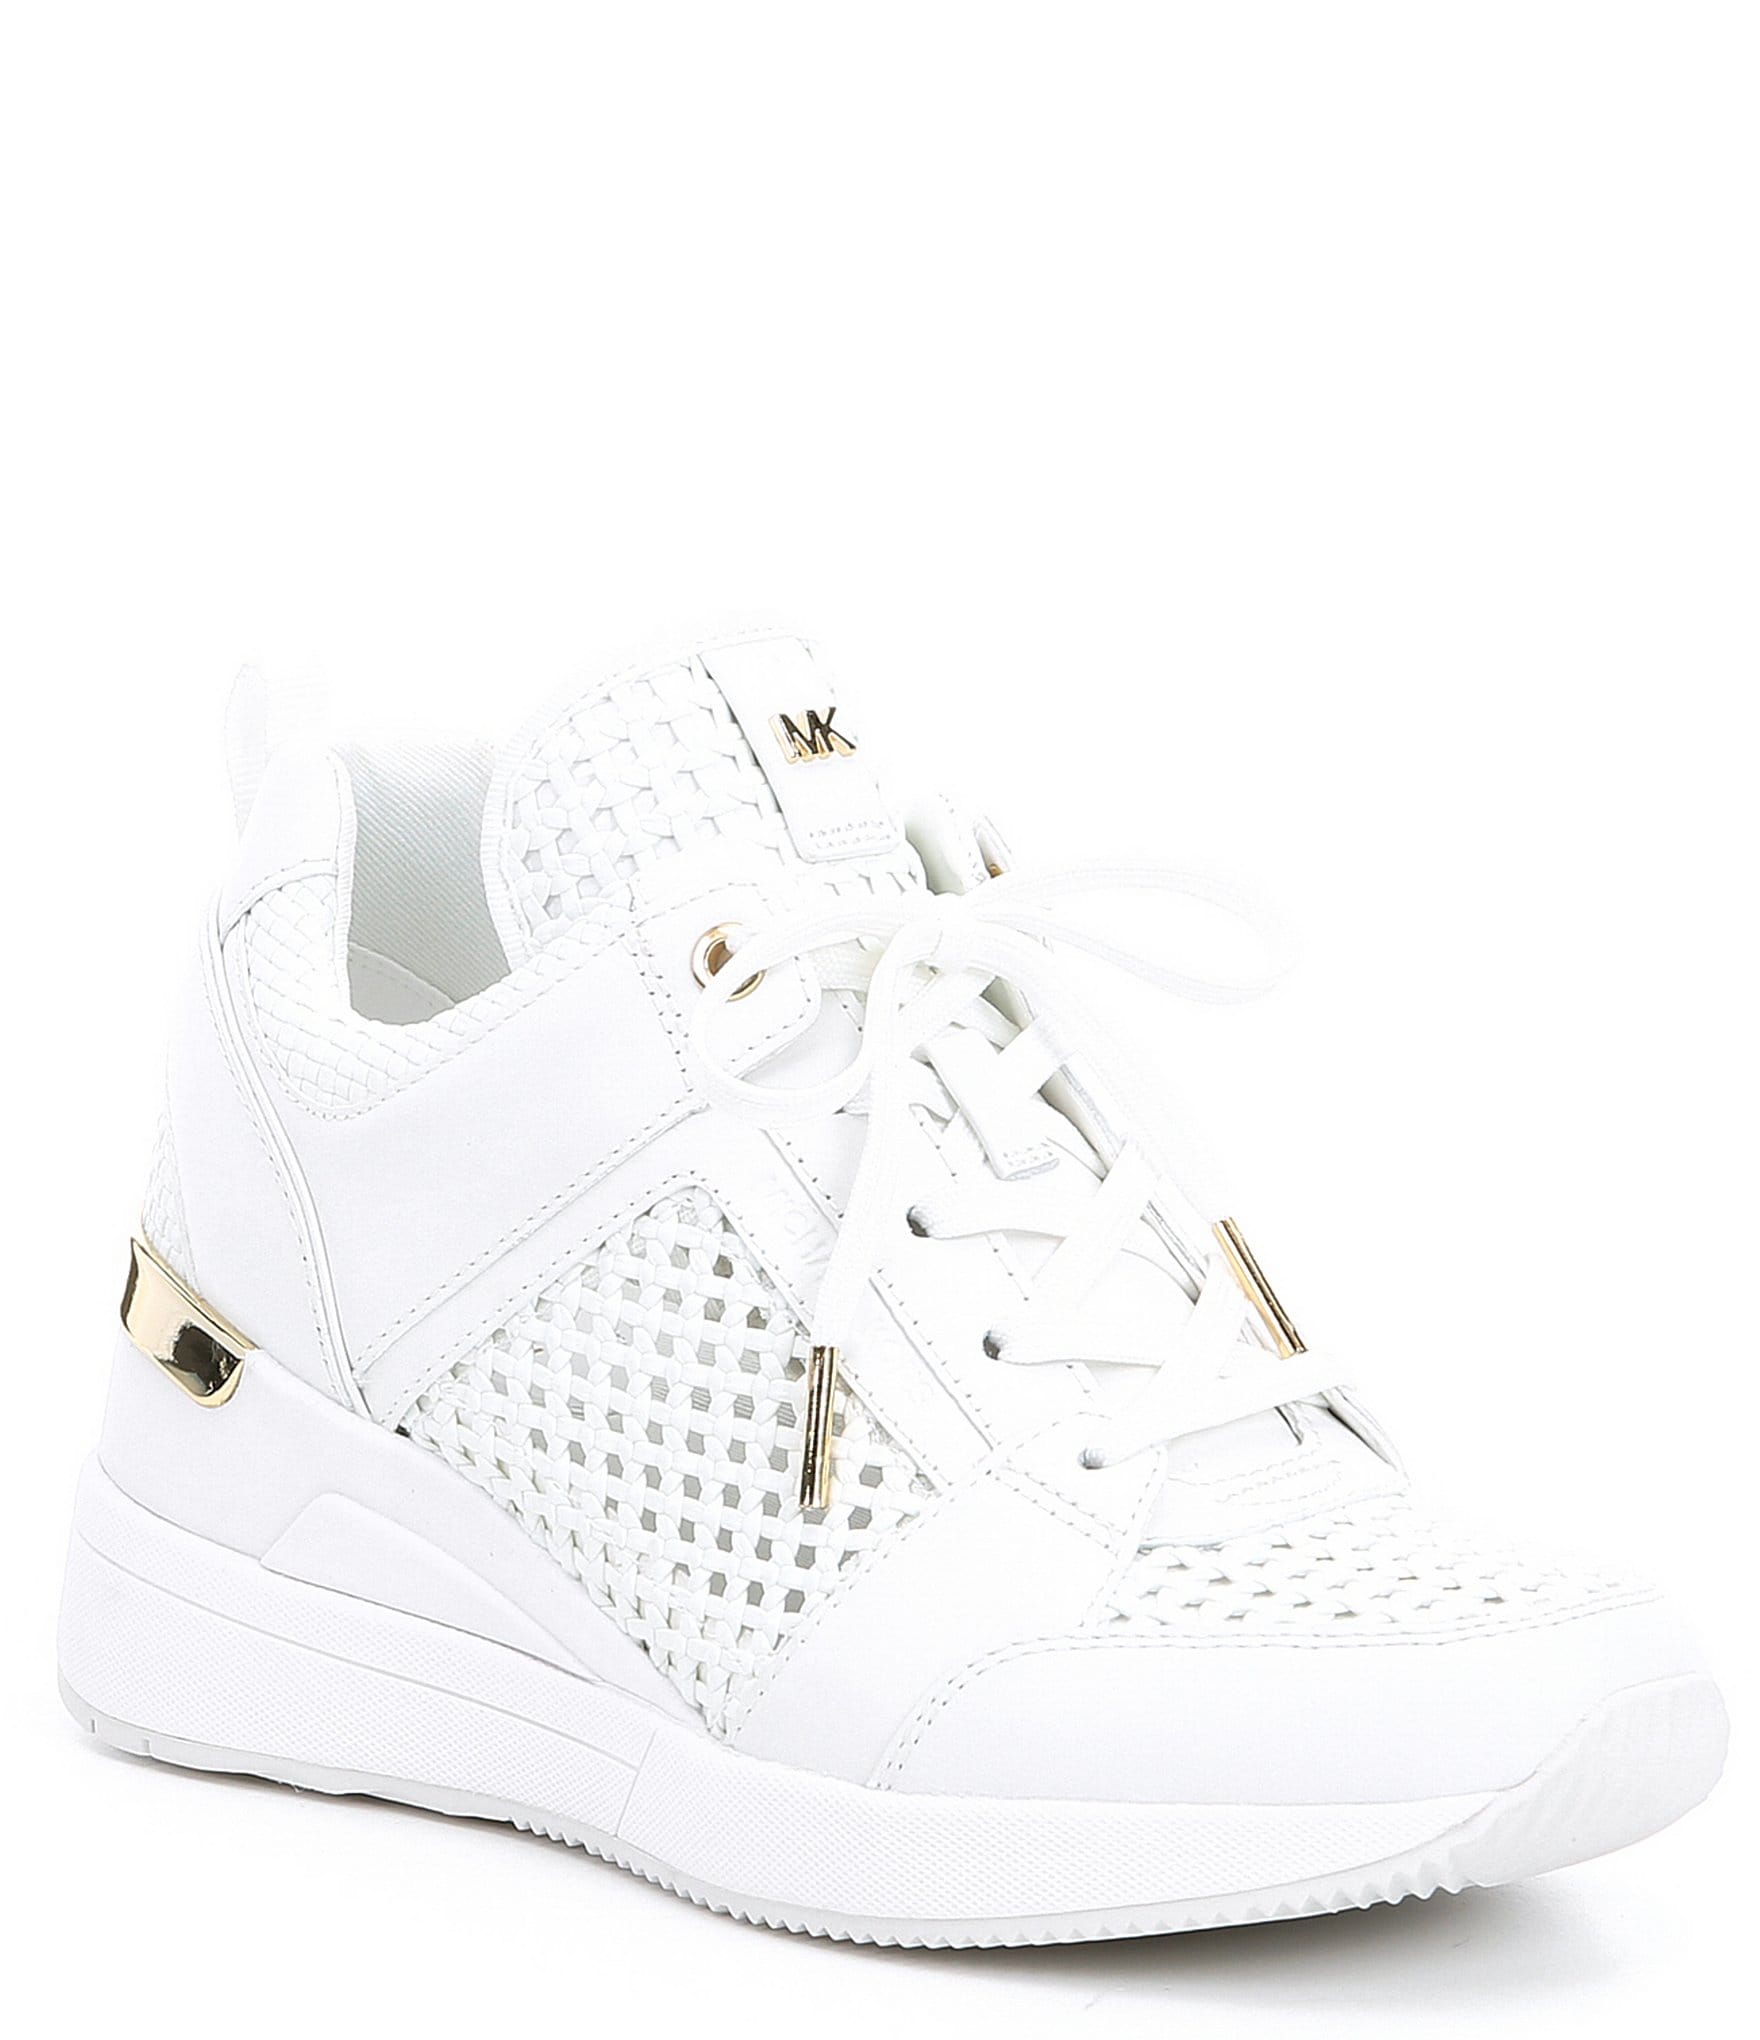 georgie woven leather trainer white